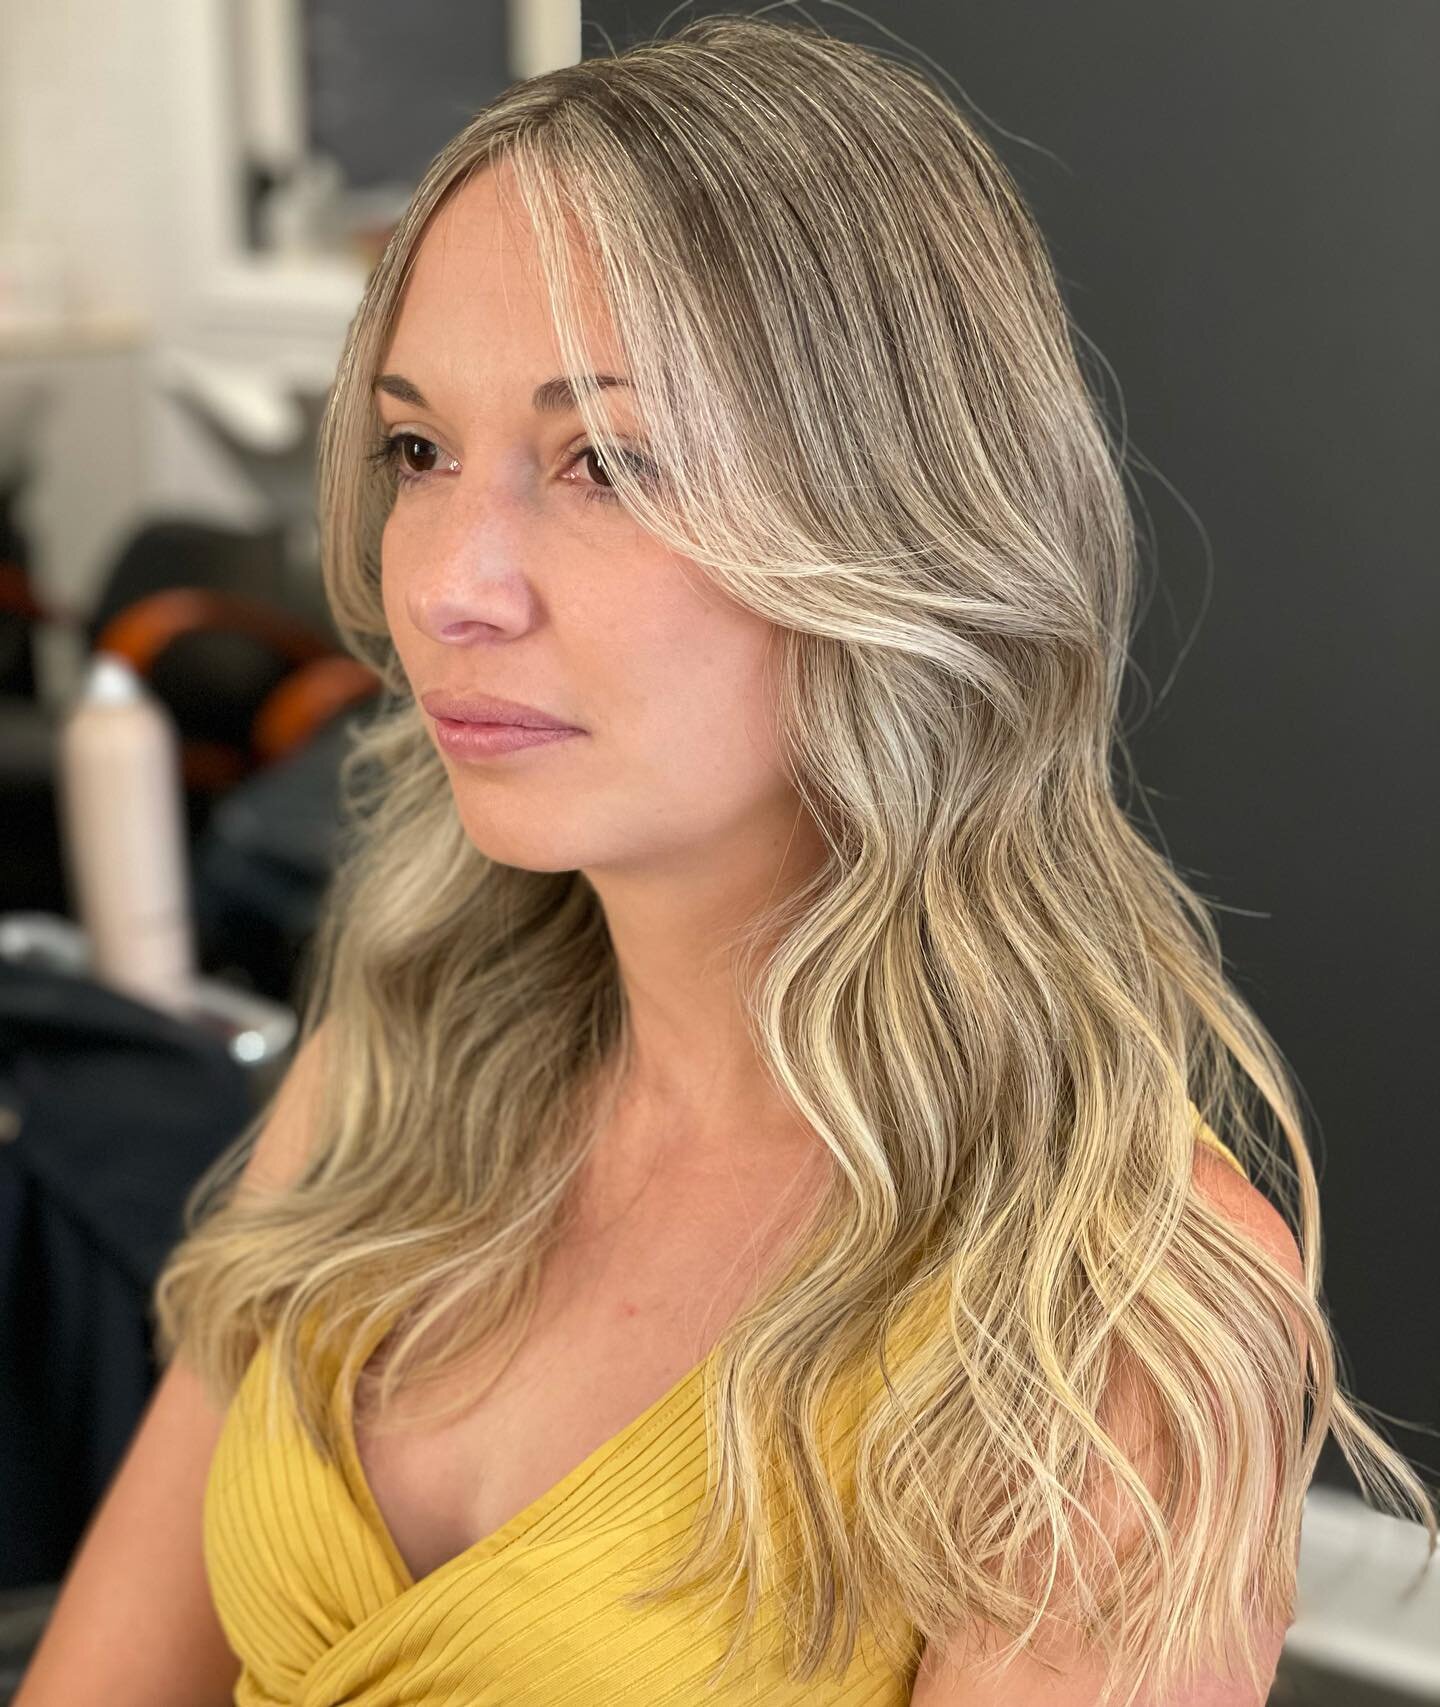 Ultra dimensional and bright for this queen. 

#chicagosalon #bronde #summer